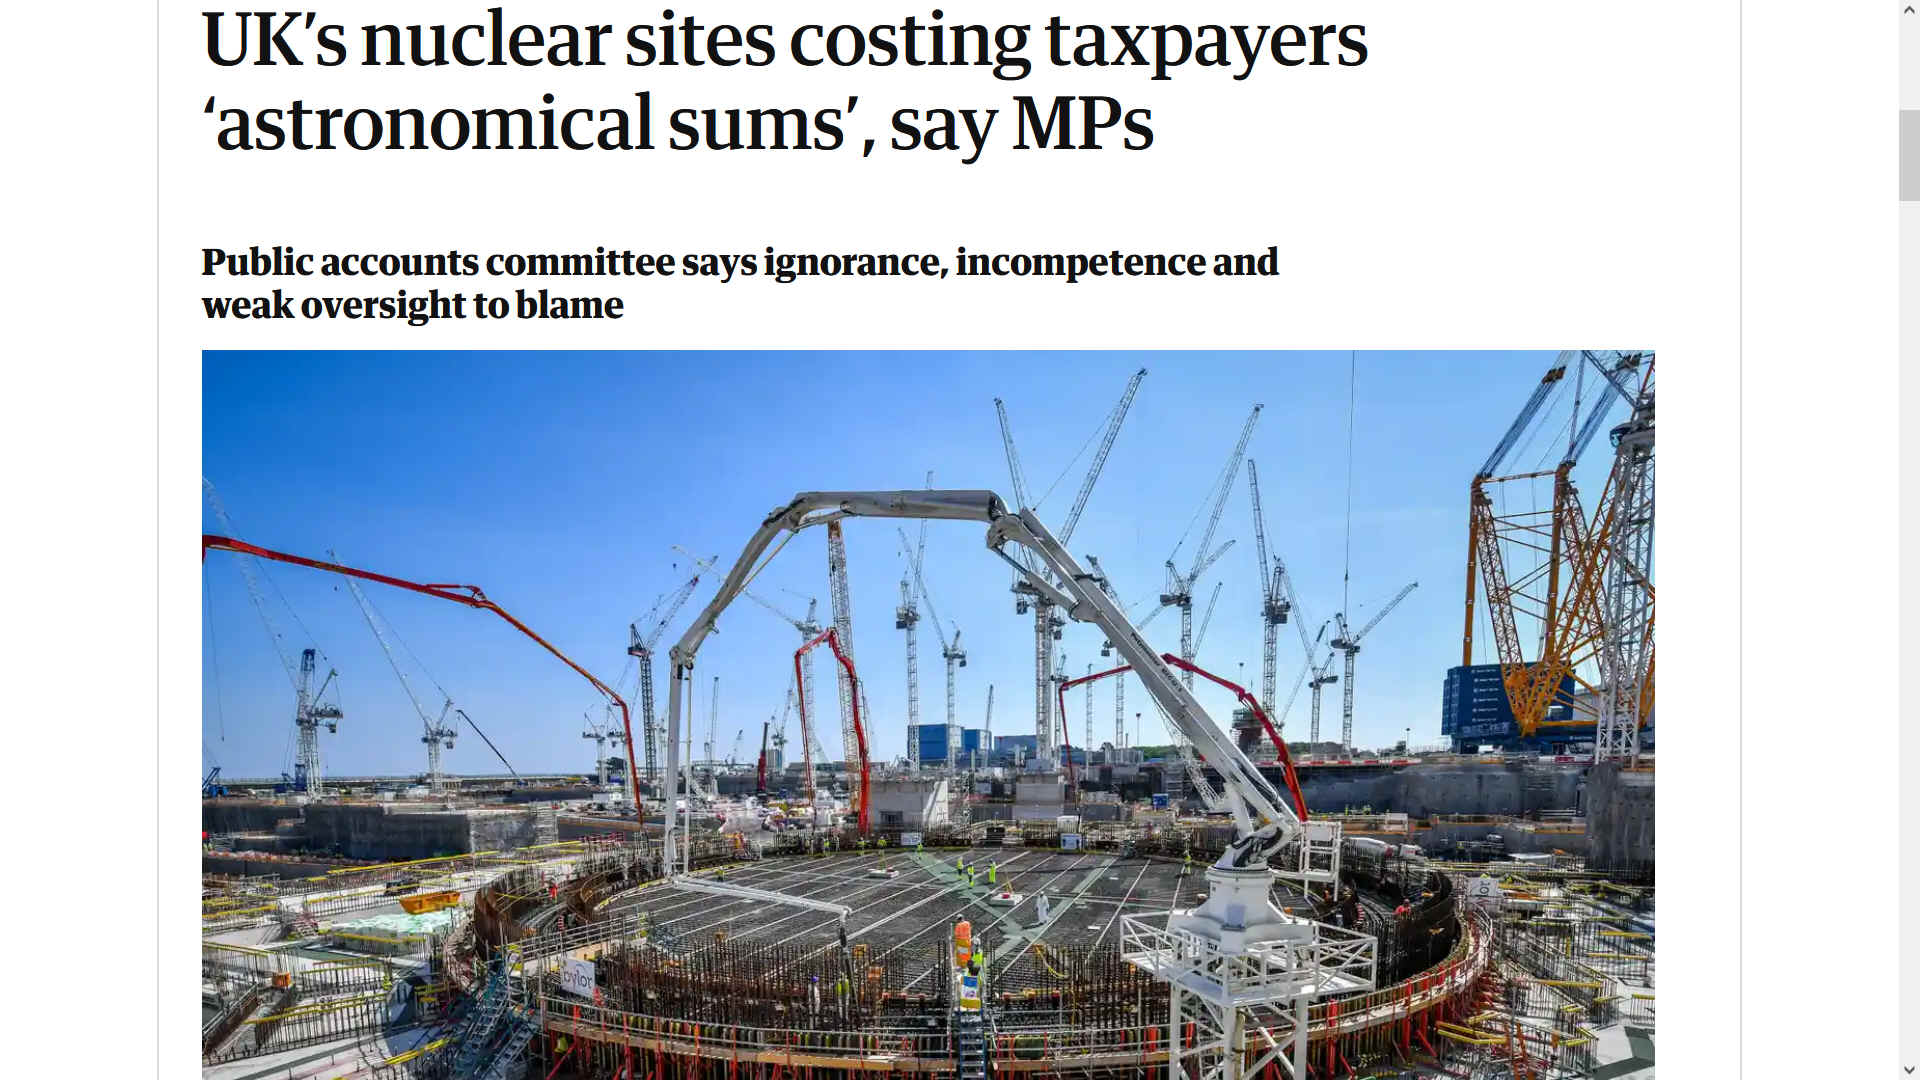 The Guardian 2020, cost of nuclear radiation £billions of pounds to taxpayer